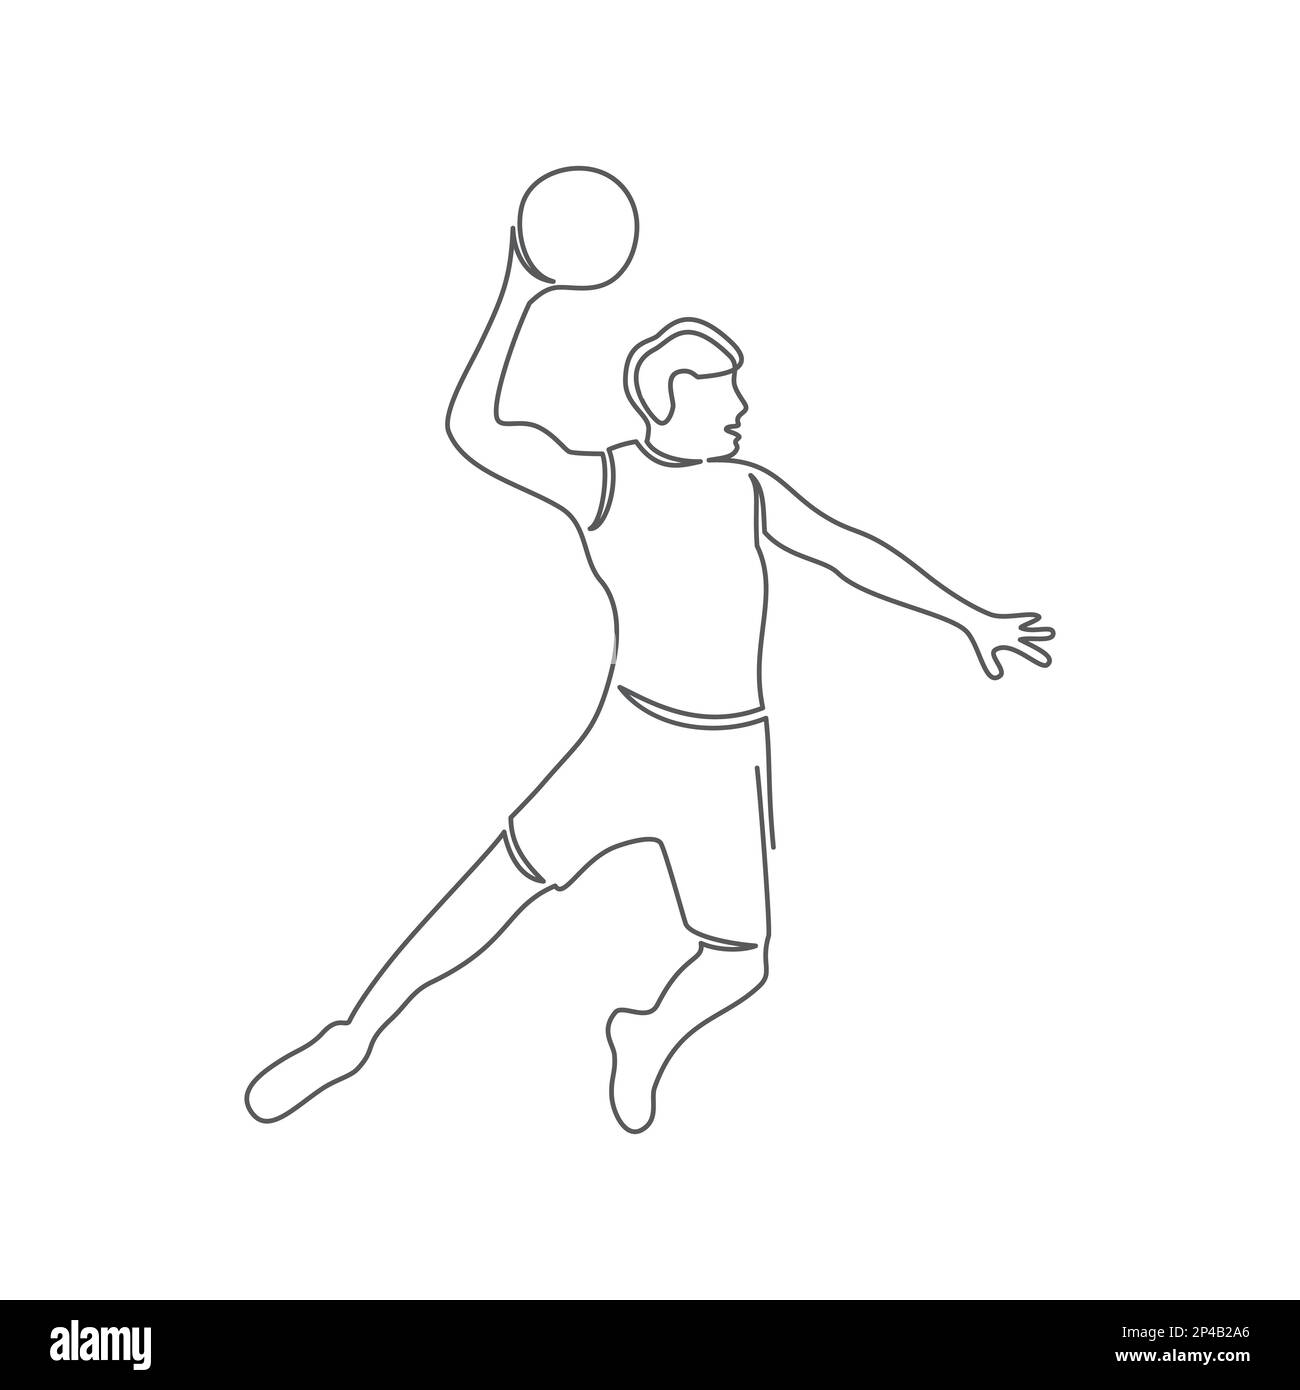 Basketball One line drawing on white background Stock Vector Image ...